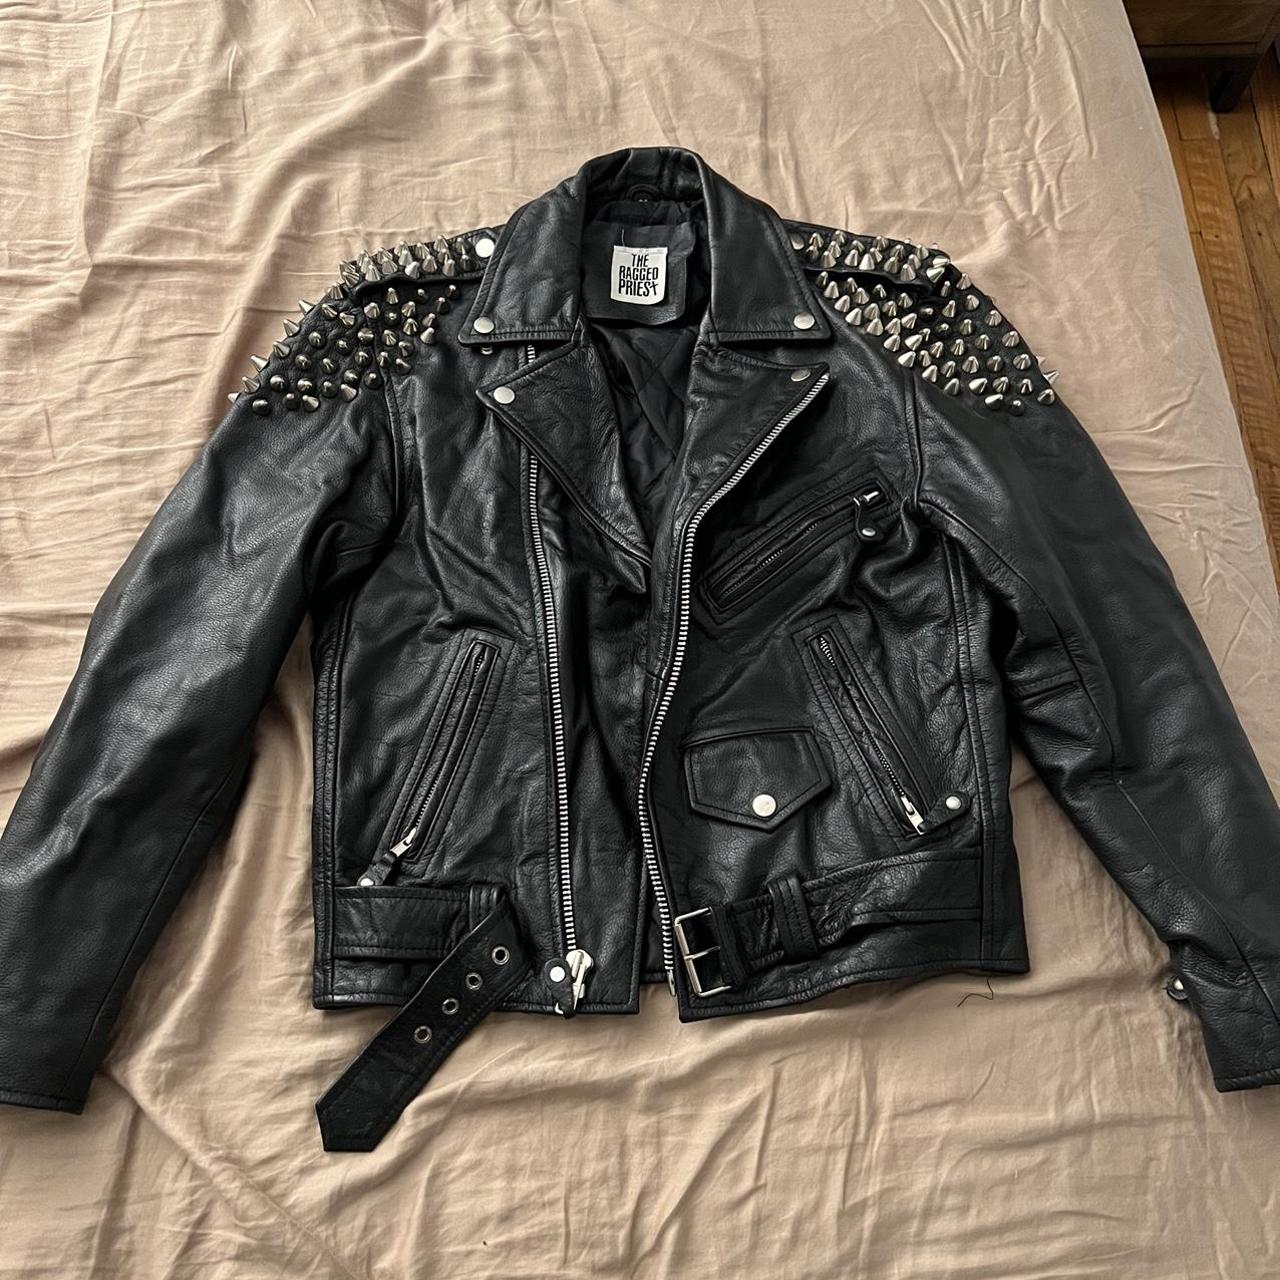 Product Image 1 - The Ragged Priest leather jacket